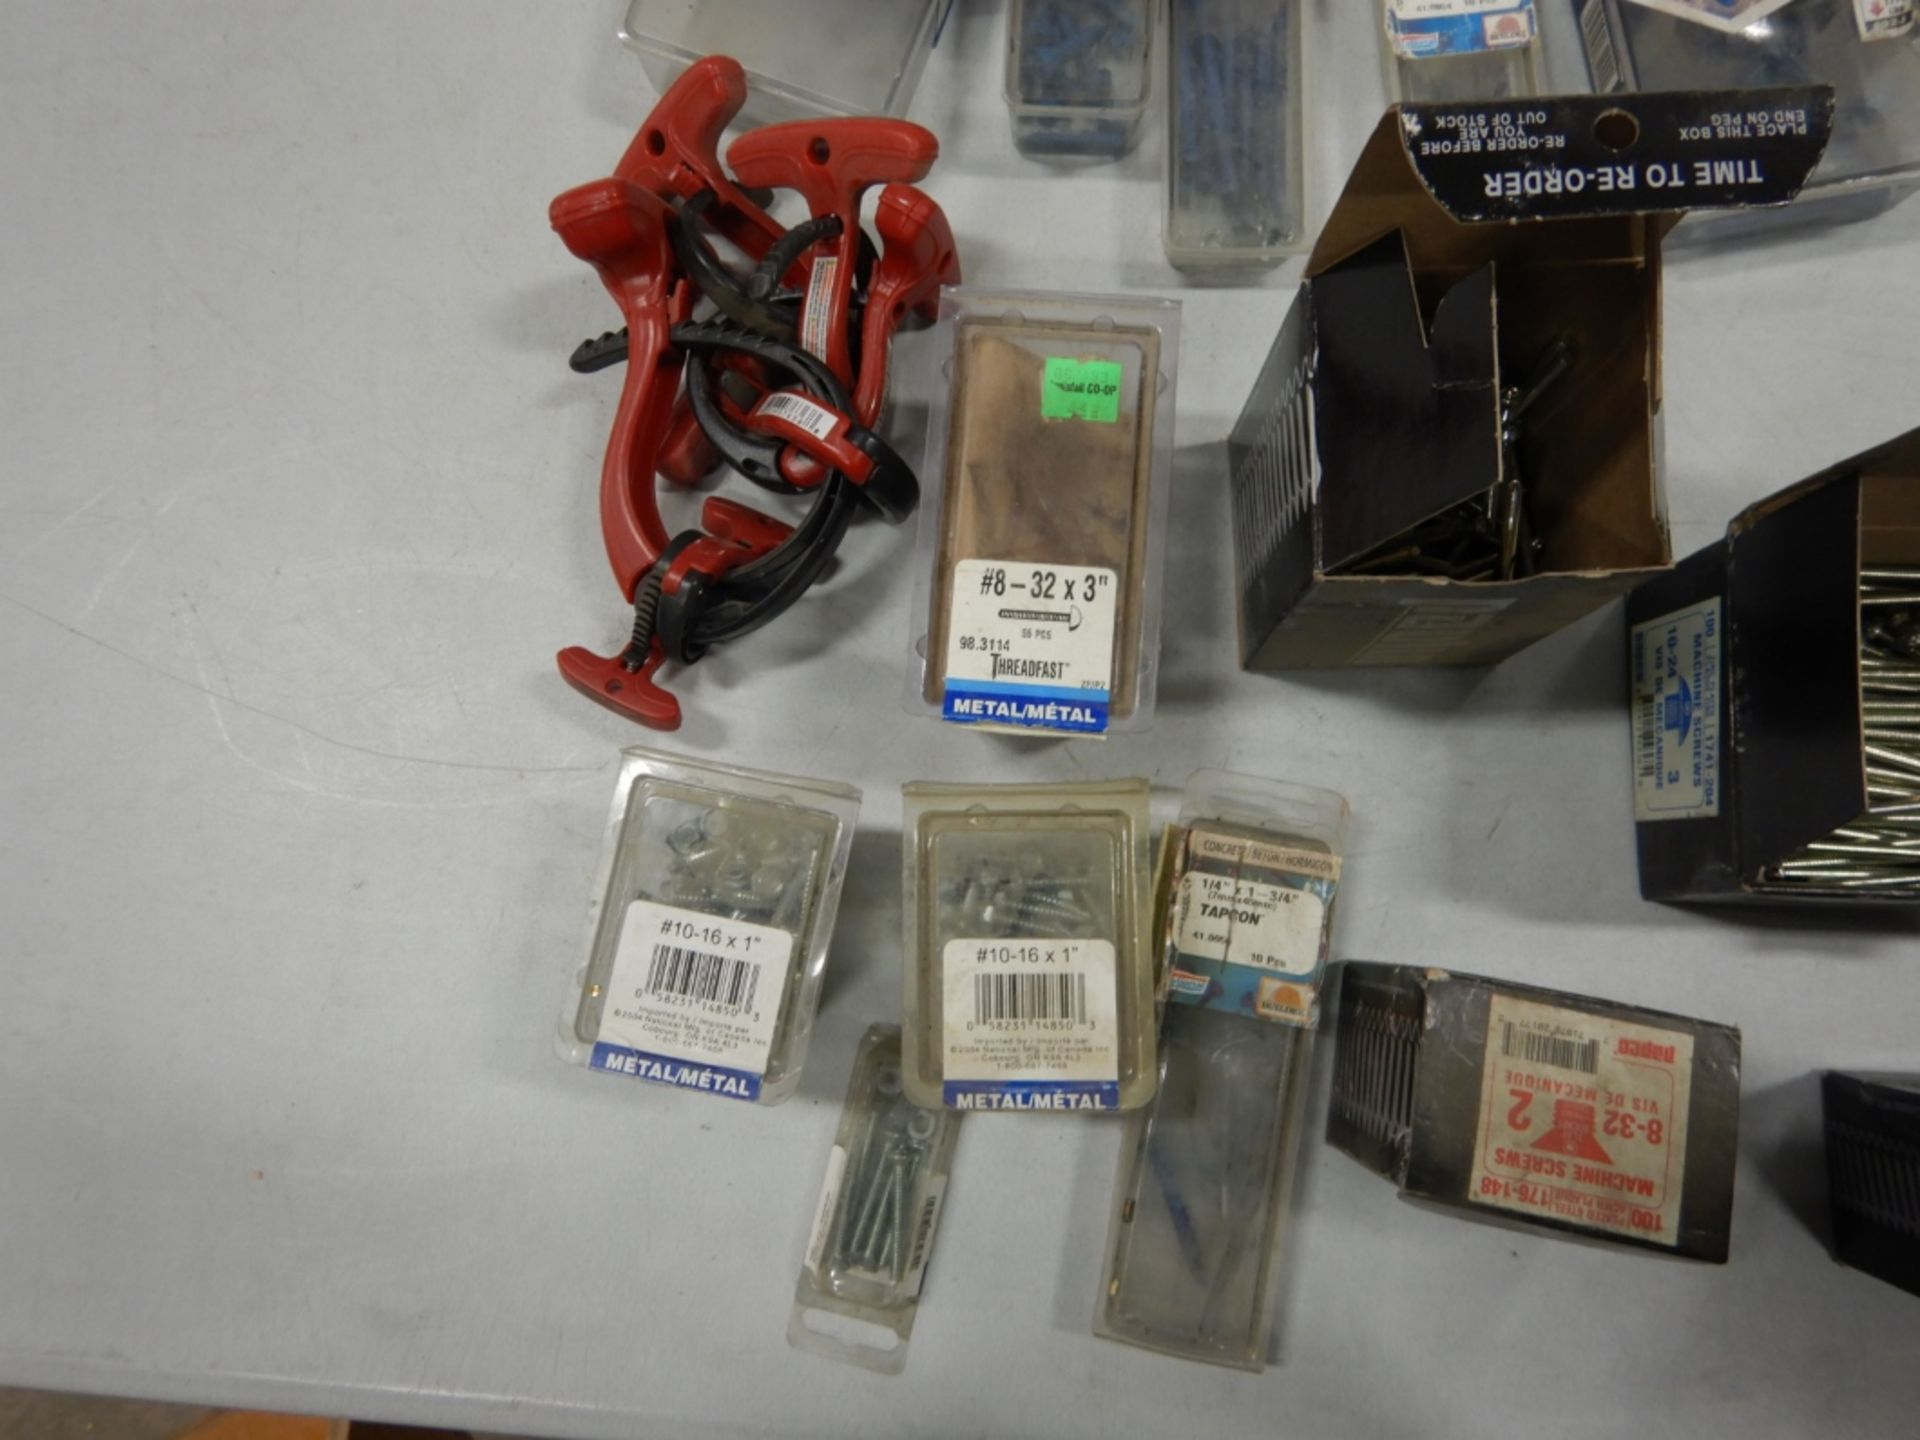 L/O ASSORTED SCREWS, HARDWARE, BOLTS, CABLE CLAMPS, ETC. - Image 3 of 5